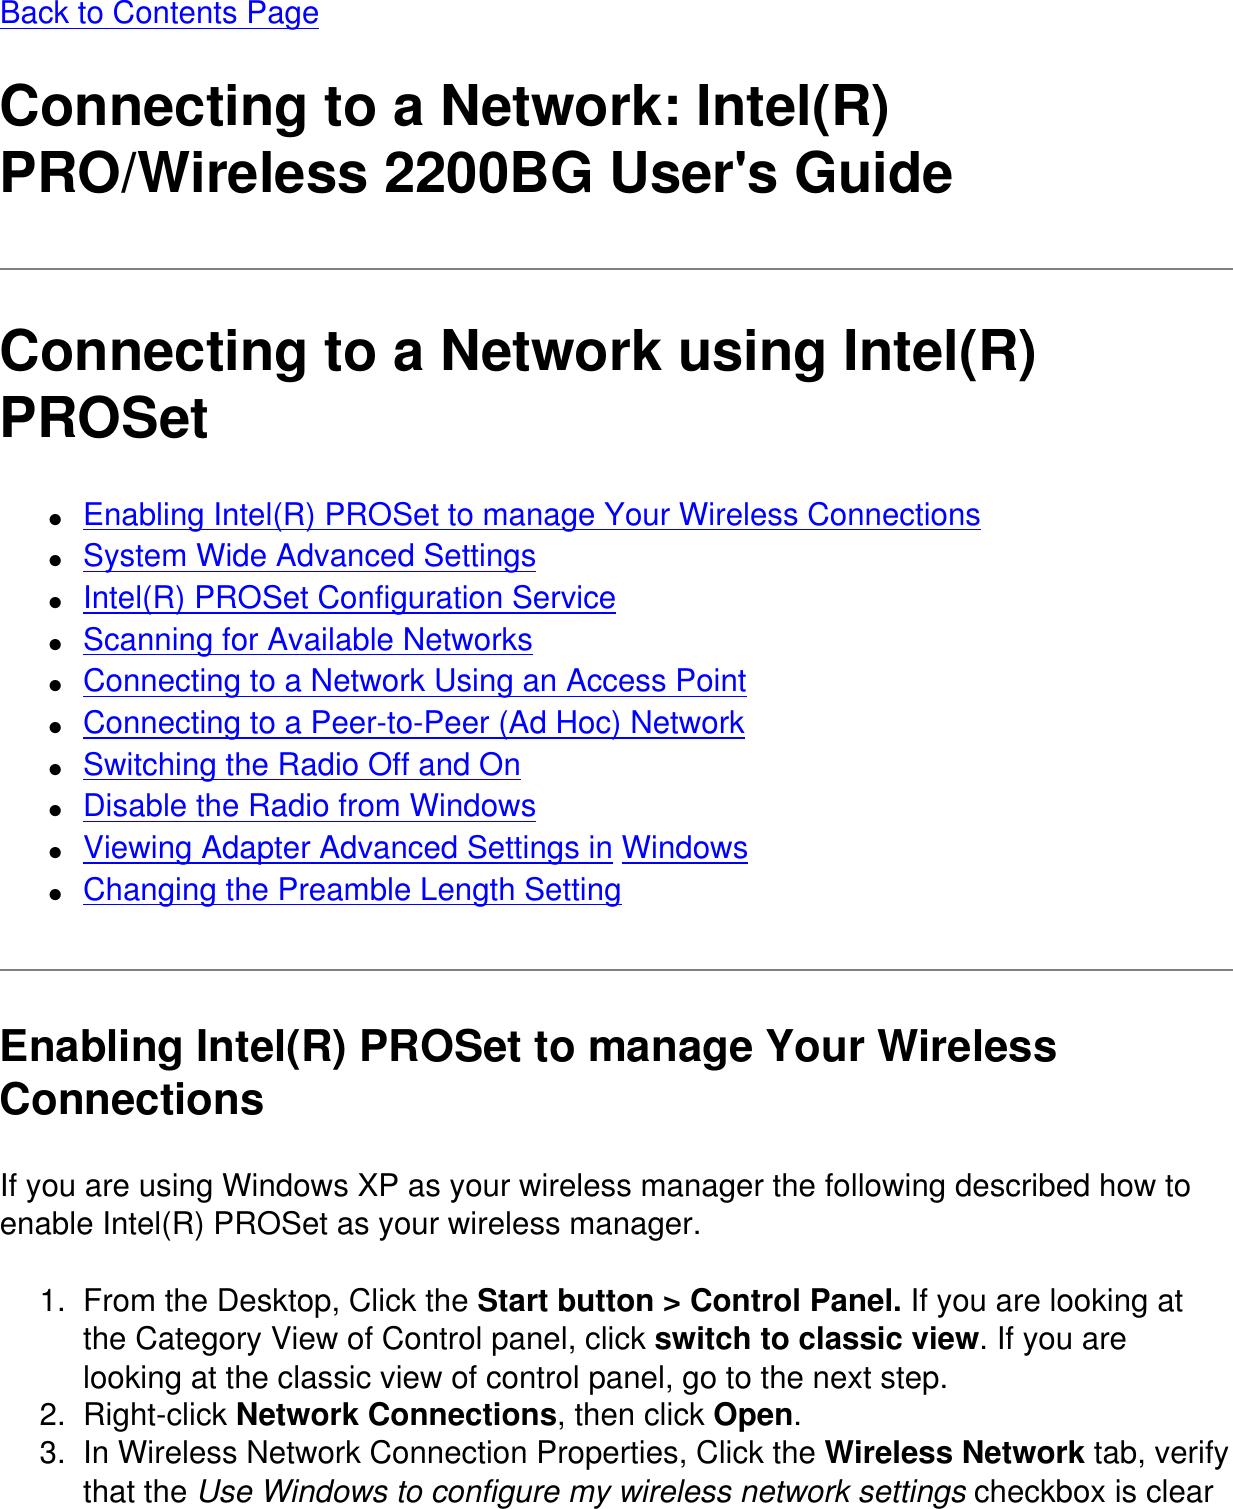 Back to Contents PageConnecting to a Network: Intel(R) PRO/Wireless 2200BG User&apos;s GuideConnecting to a Network using Intel(R) PROSet●     Enabling Intel(R) PROSet to manage Your Wireless Connections●     System Wide Advanced Settings●     Intel(R) PROSet Configuration Service●     Scanning for Available Networks●     Connecting to a Network Using an Access Point●     Connecting to a Peer-to-Peer (Ad Hoc) Network●     Switching the Radio Off and On●     Disable the Radio from Windows●     Viewing Adapter Advanced Settings in Windows●     Changing the Preamble Length SettingEnabling Intel(R) PROSet to manage Your Wireless ConnectionsIf you are using Windows XP as your wireless manager the following described how to enable Intel(R) PROSet as your wireless manager.1.  From the Desktop, Click the Start button &gt; Control Panel. If you are looking at the Category View of Control panel, click switch to classic view. If you are looking at the classic view of control panel, go to the next step.2.  Right-click Network Connections, then click Open.3.  In Wireless Network Connection Properties, Click the Wireless Network tab, verify that the Use Windows to configure my wireless network settings checkbox is clear 